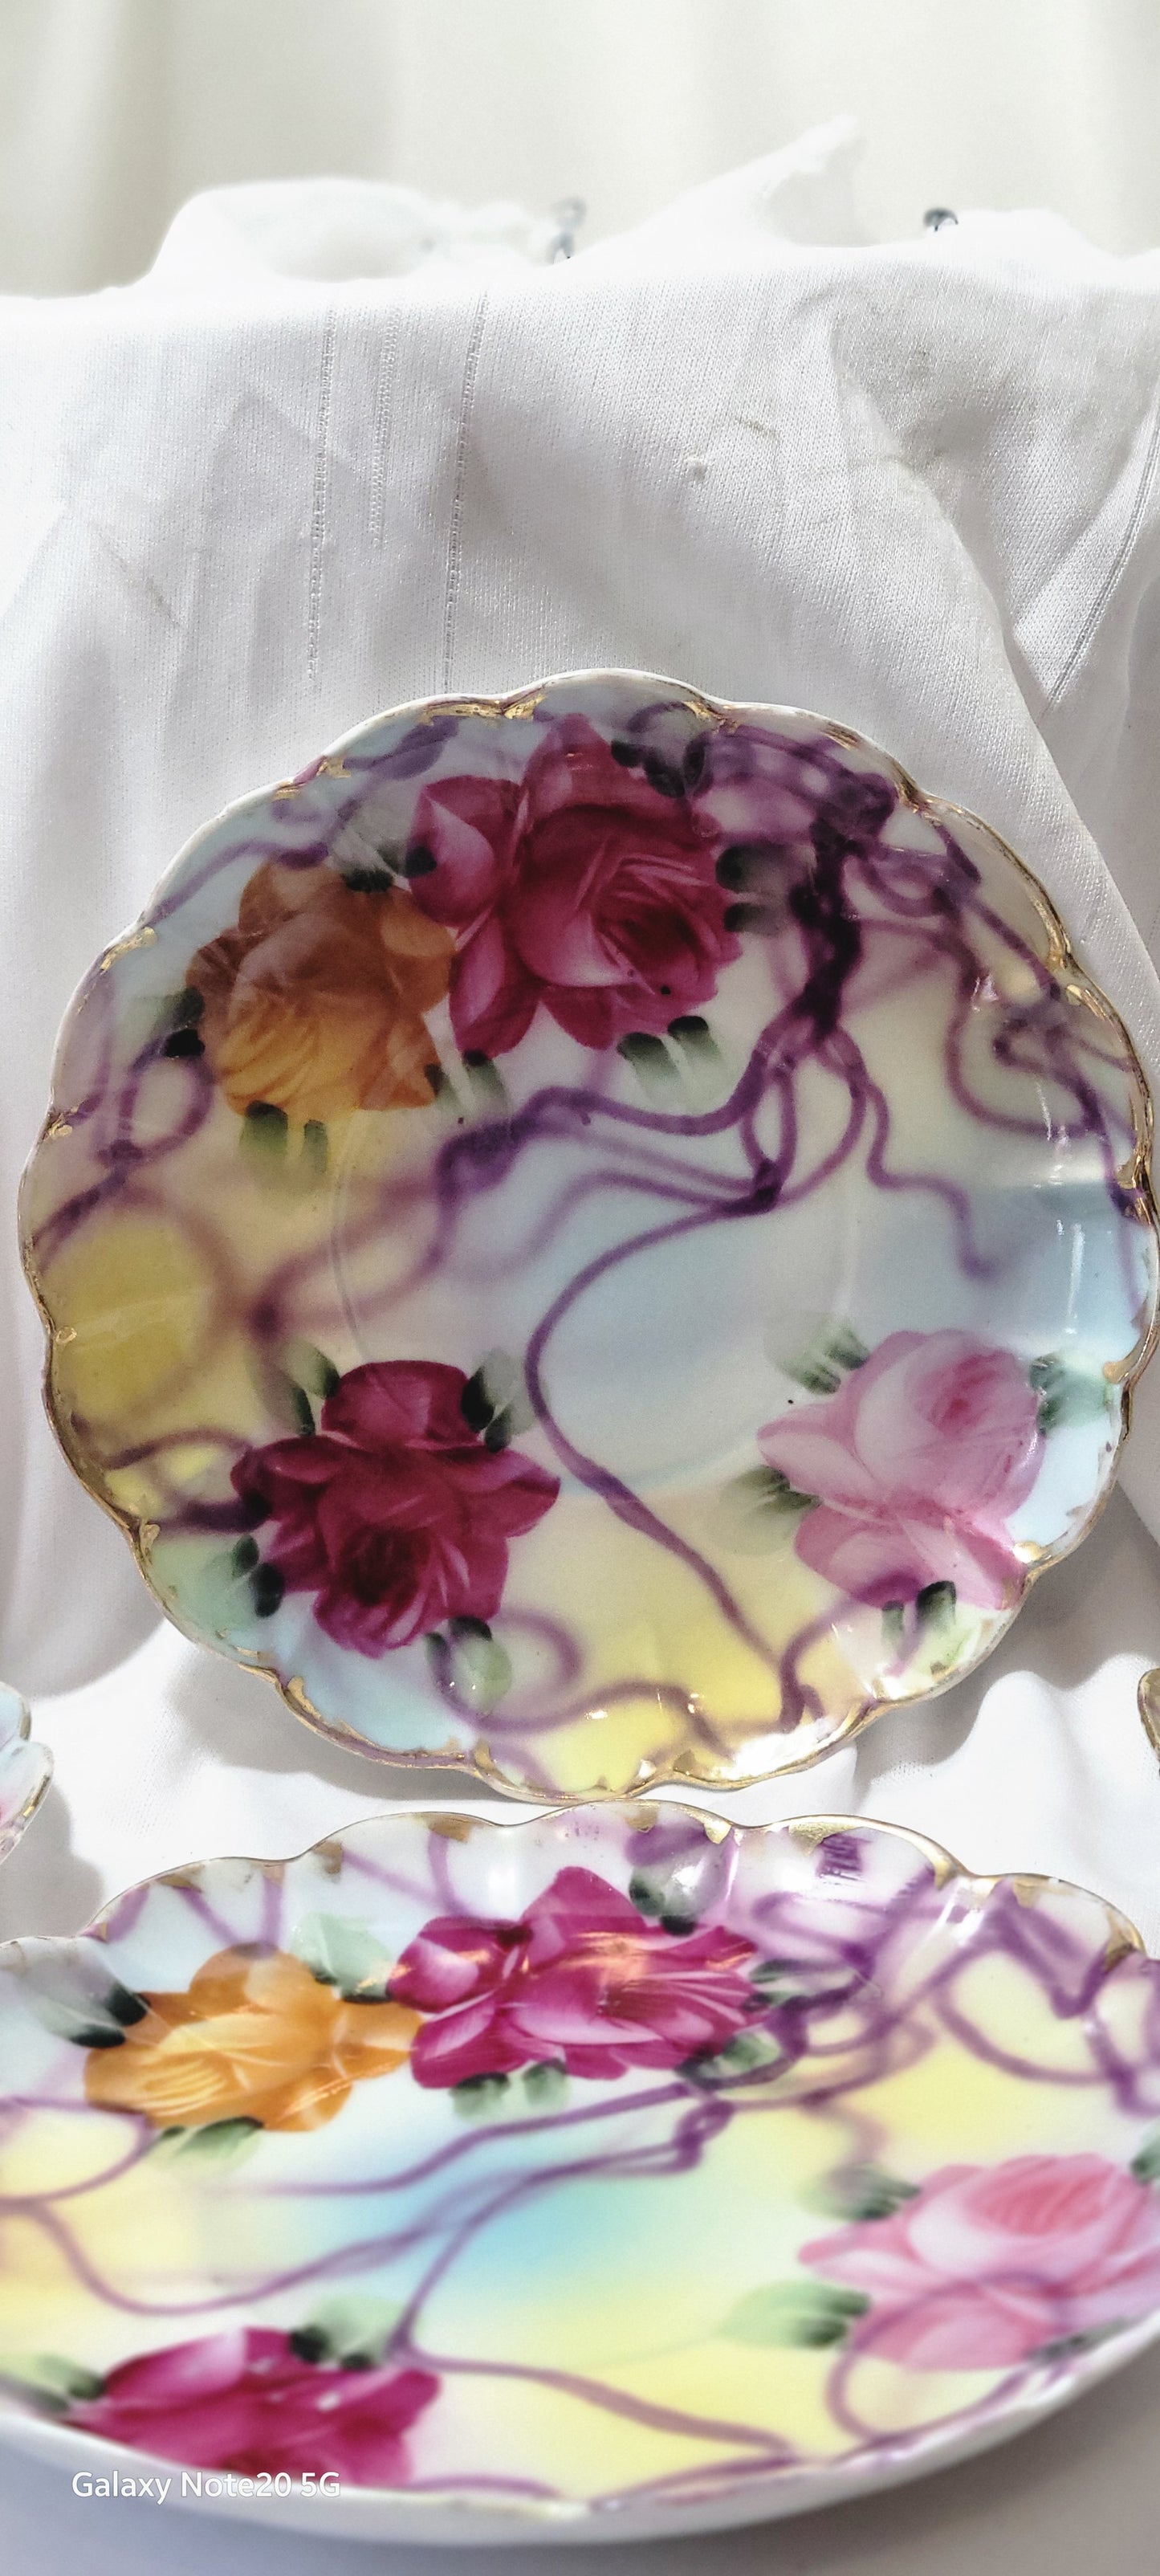 Porcelain China Plate For Teacup